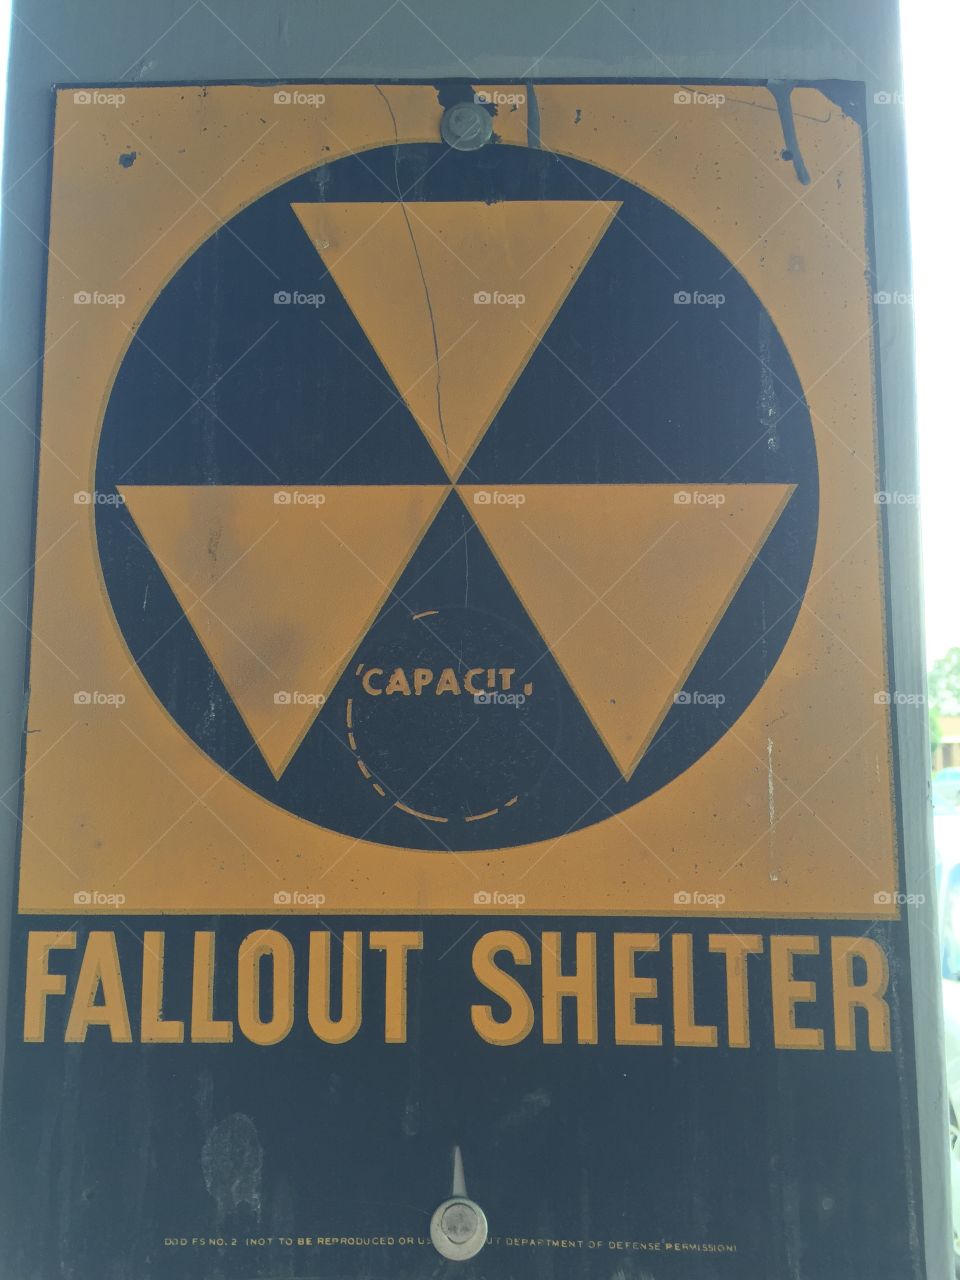 Fallout shelter sign
